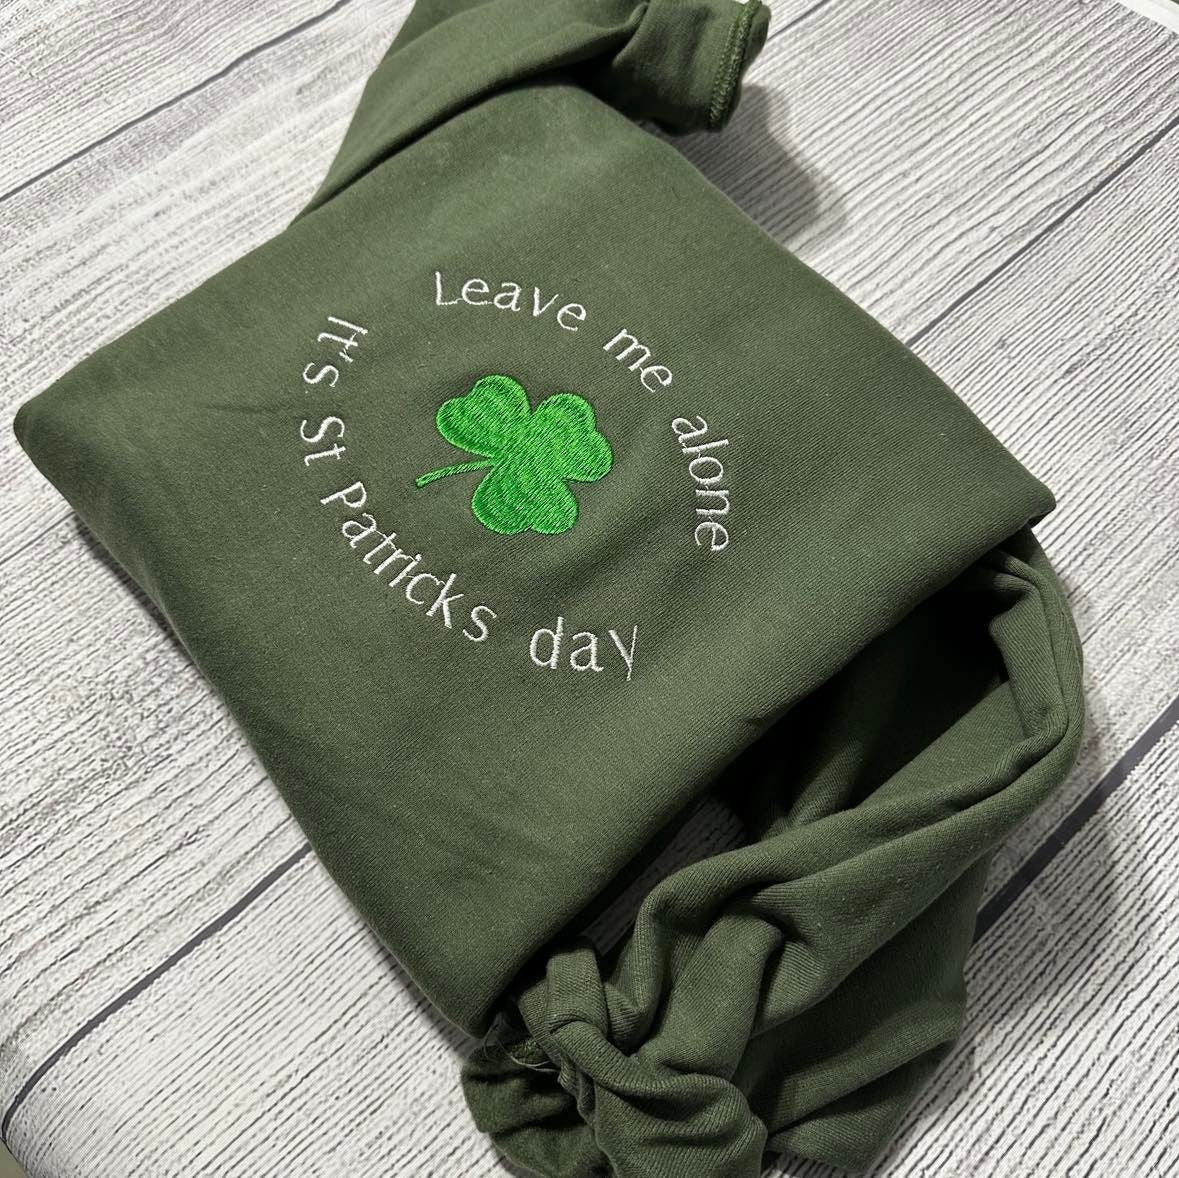 Patrick's day Embroidered Sweatshirt; leave me alone i't St Patrick's day Sweater; St.  St Patricks day gift for him/her